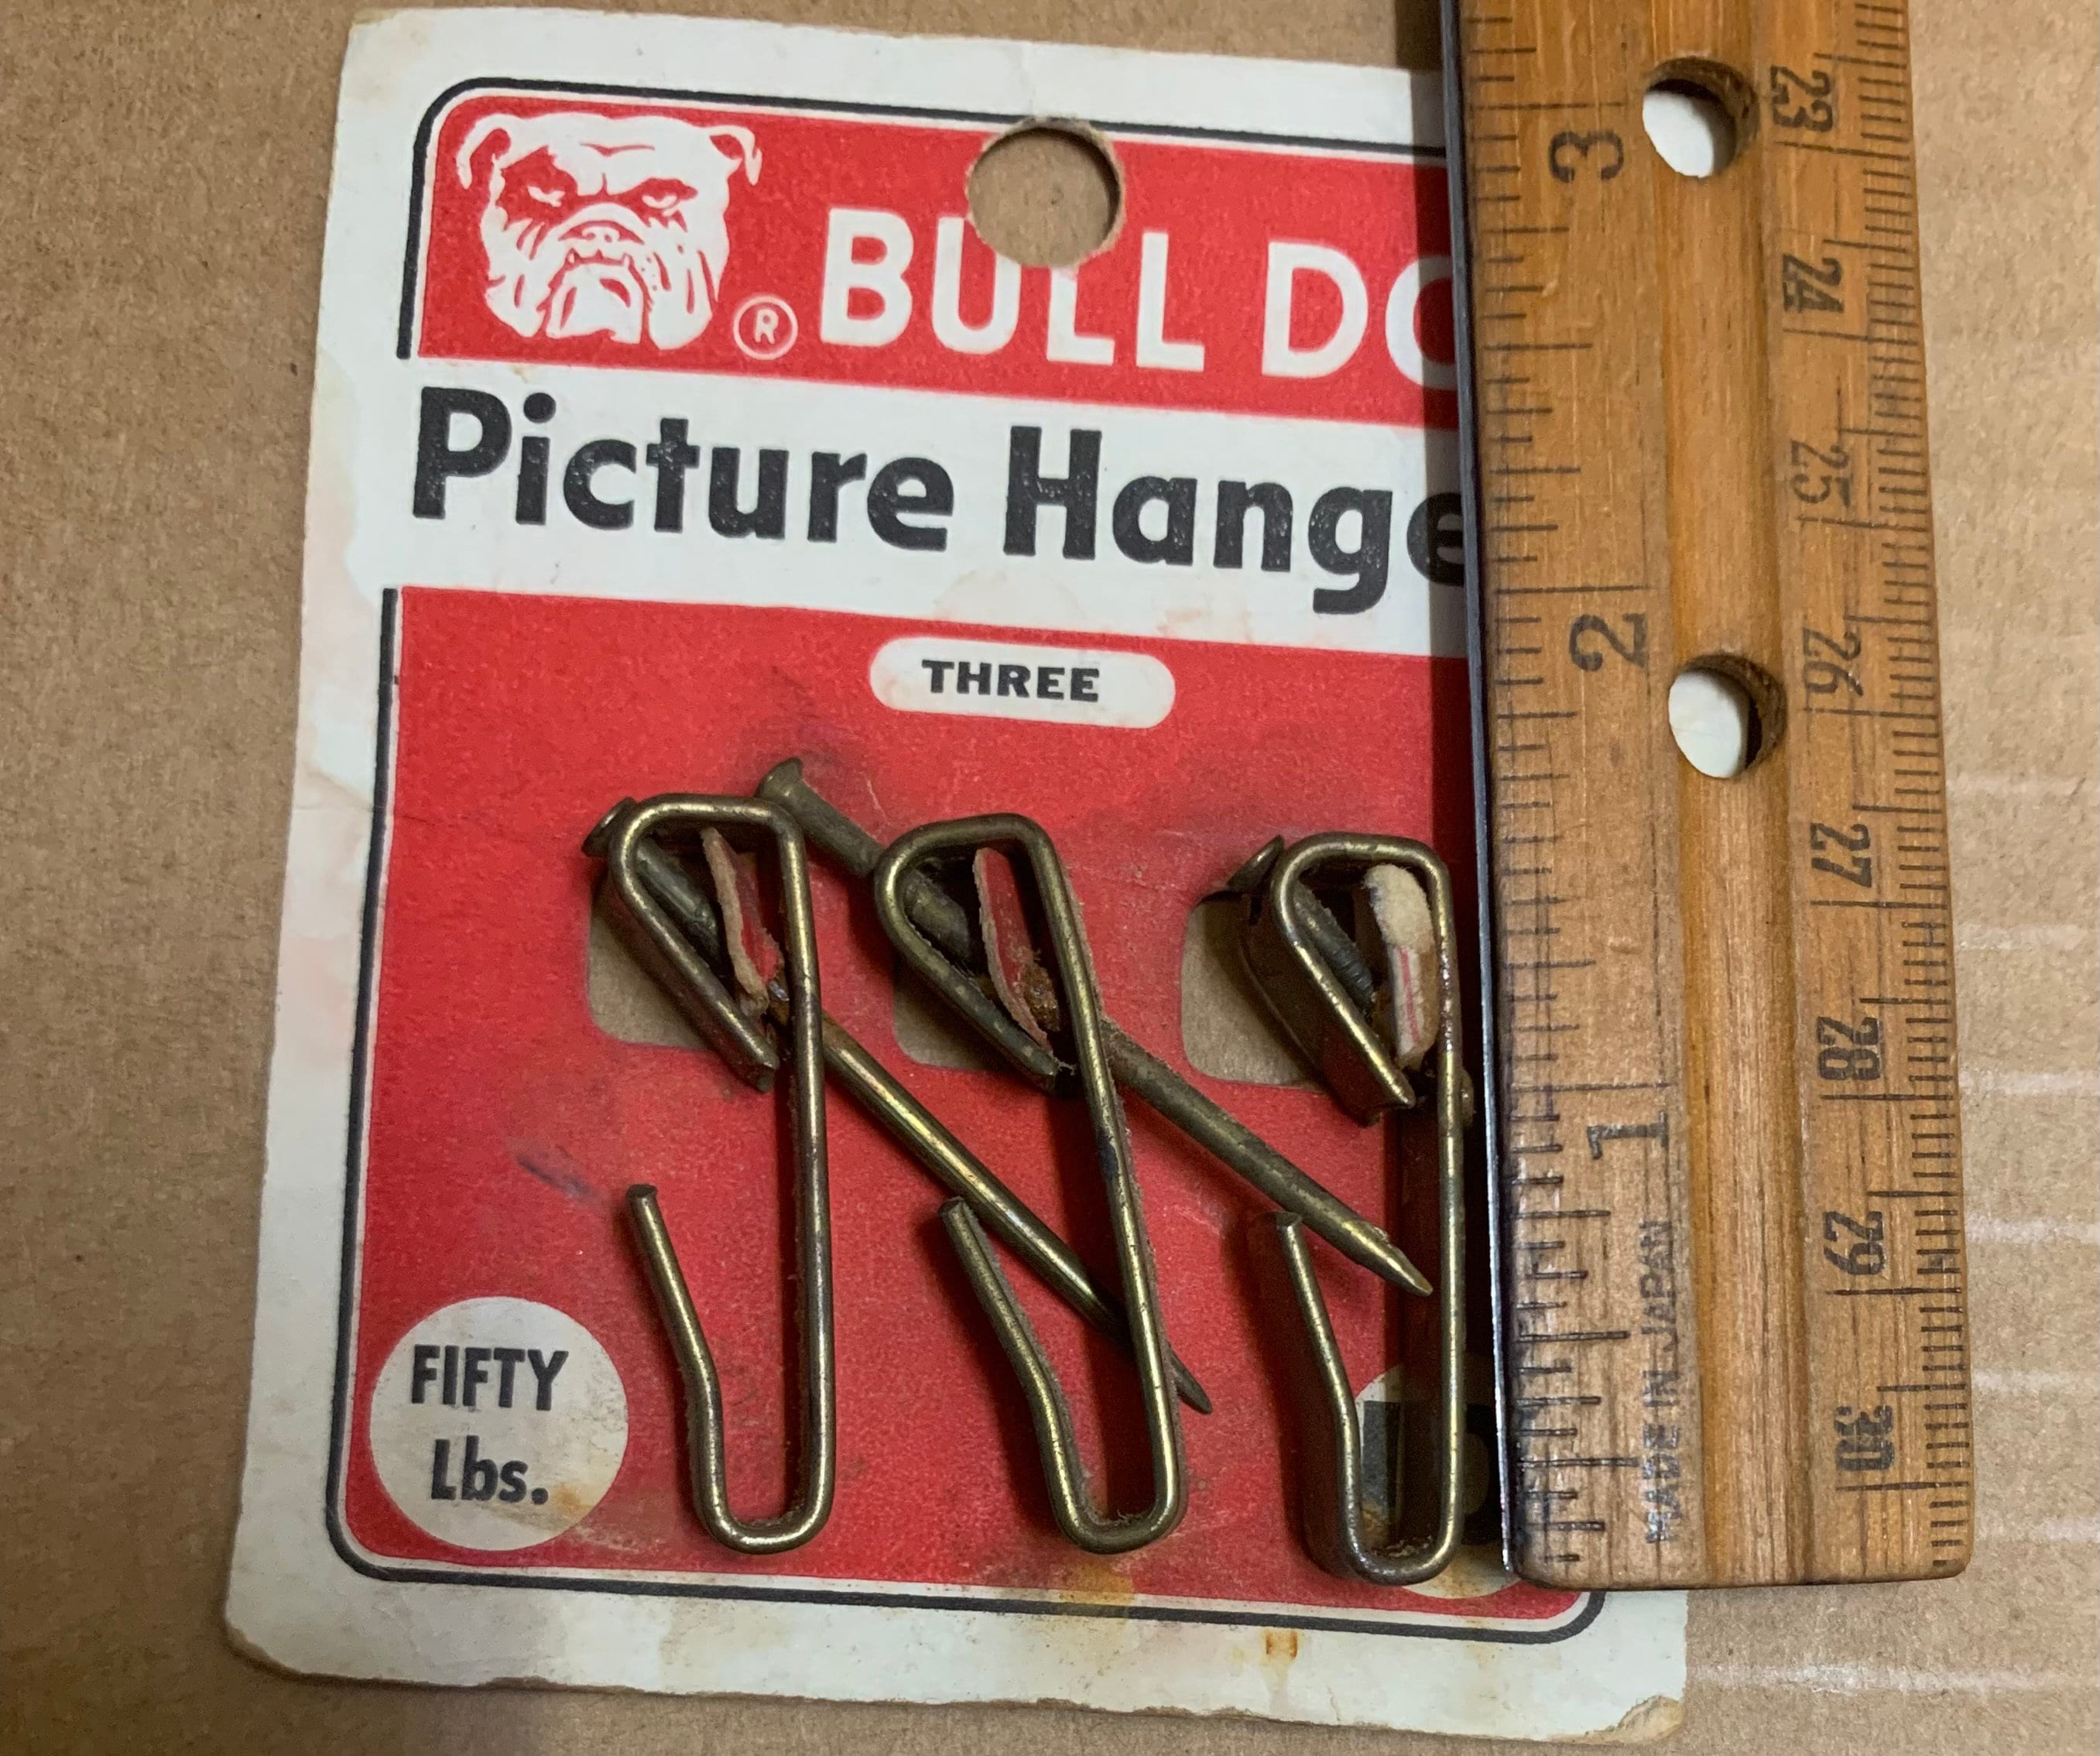 Bulldog Picture Frame Hangers - 50 Pound - (4 Pack) - D. Lawless